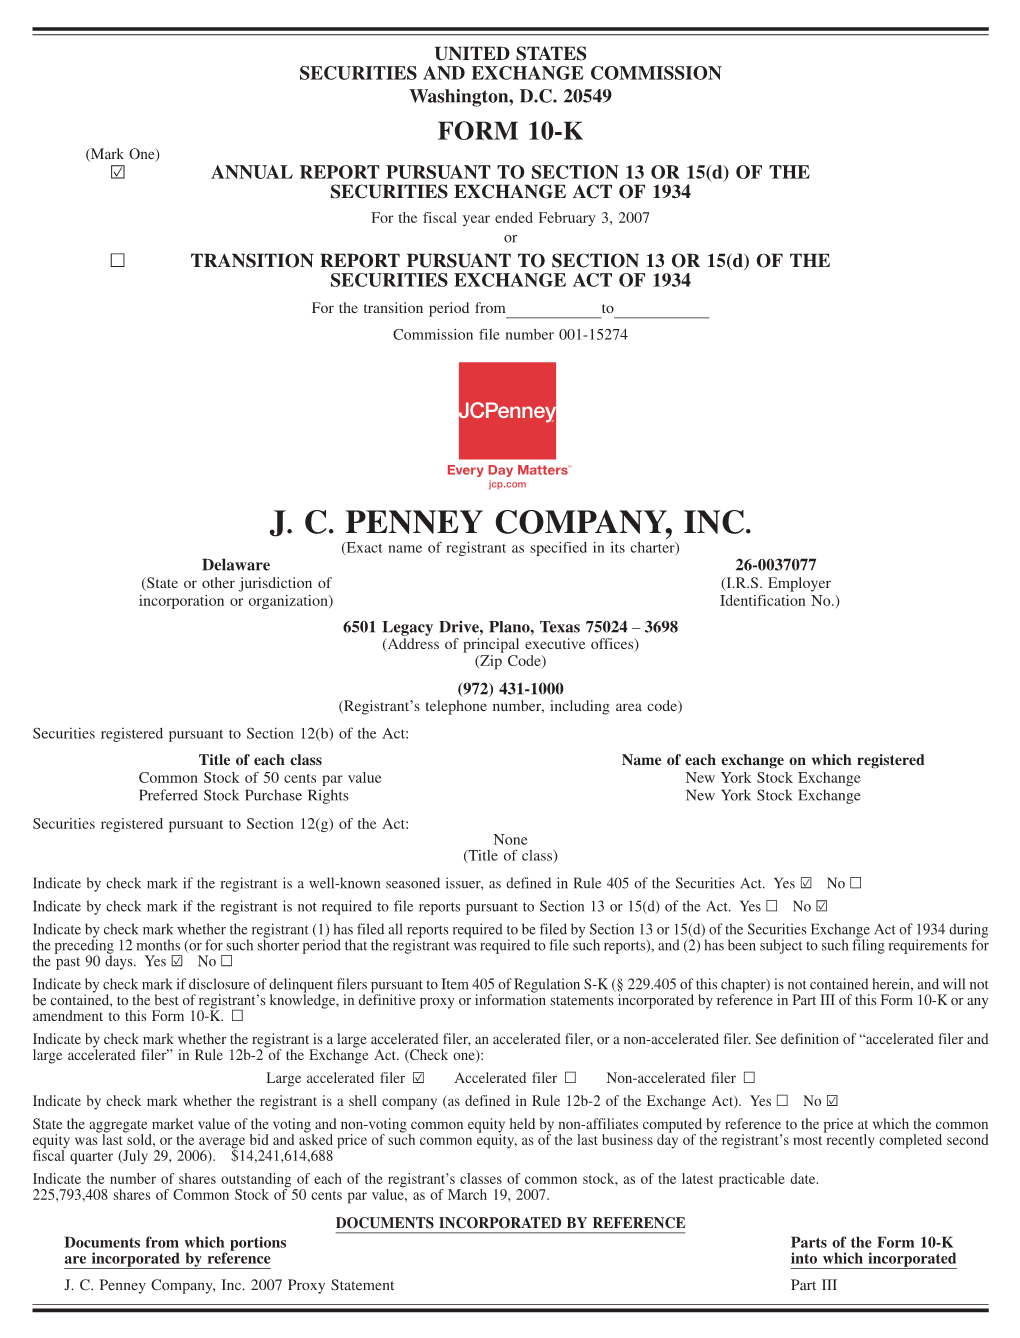 J. C. PENNEY COMPANY, INC. (Exact Name of Registrant As Specified in Its Charter) Delaware 26-0037077 (State Or Other Jurisdiction of (I.R.S